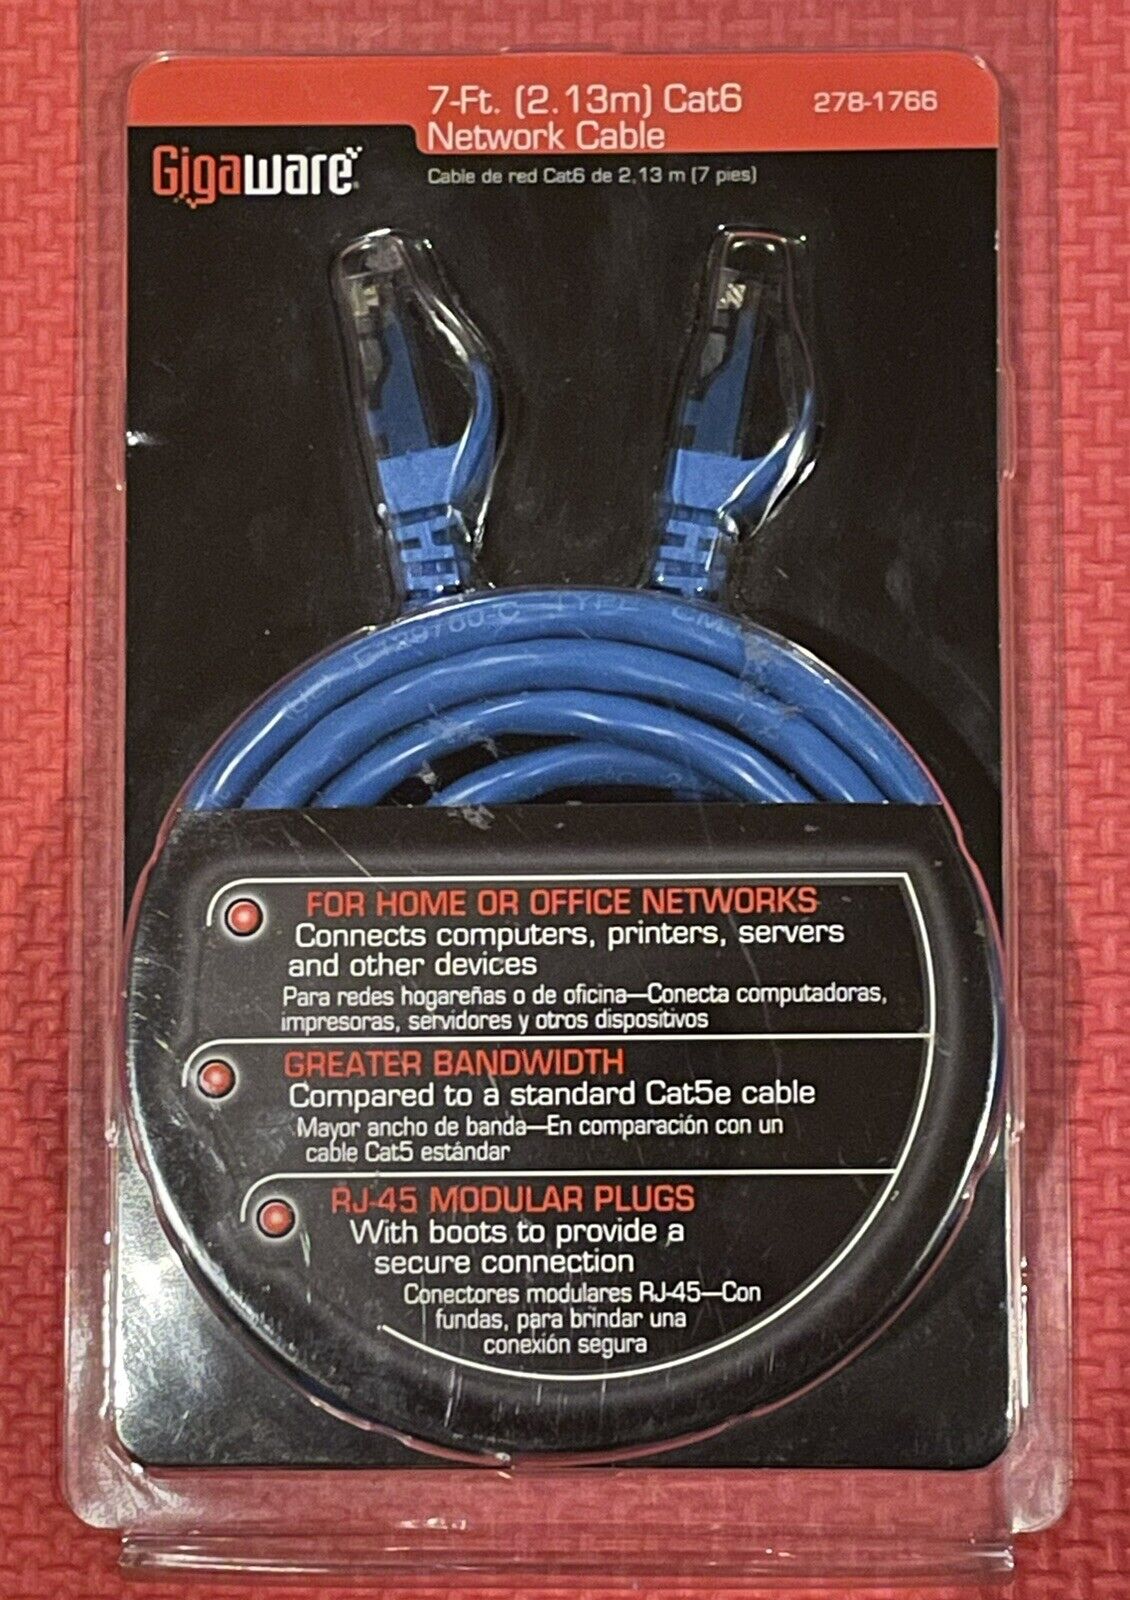 GIgaware 7ft. (2.13m)  Cat6  Network  Cable  278-1766 